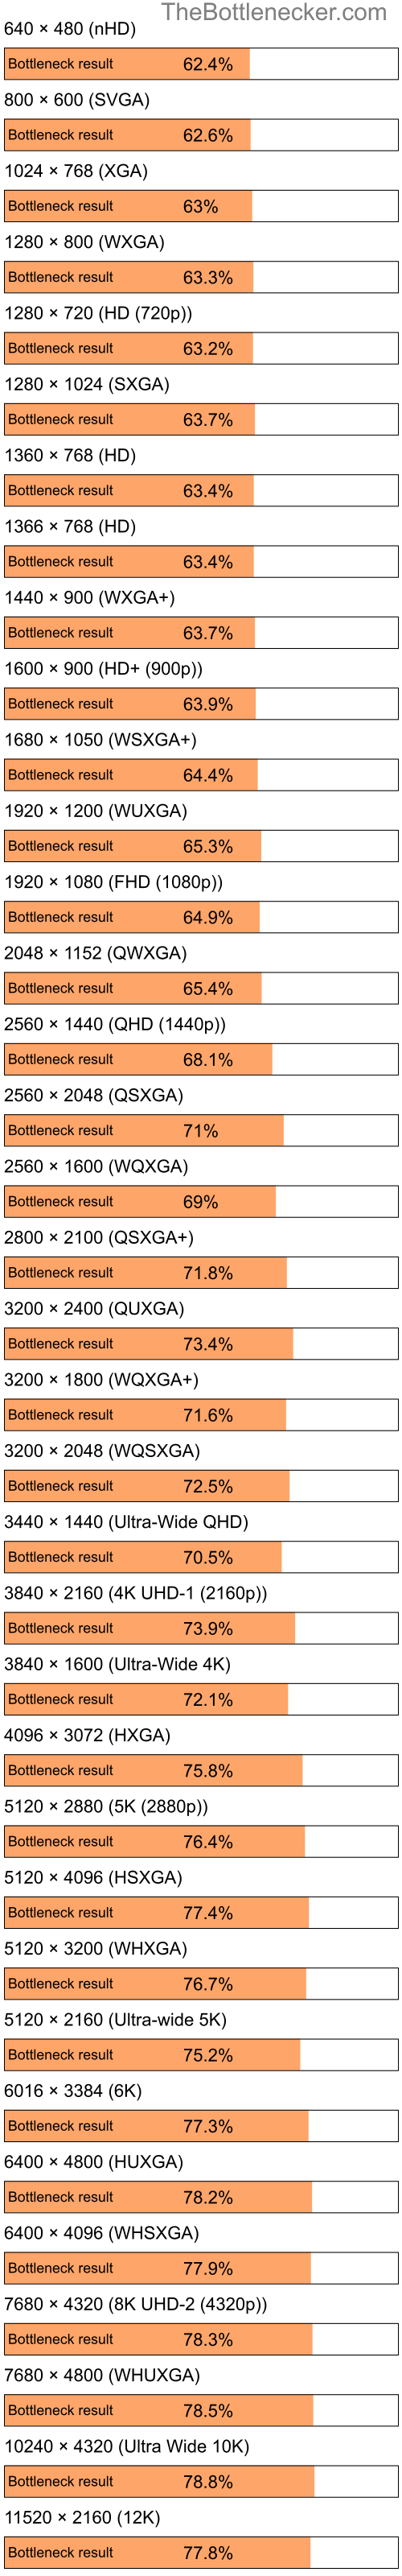 Bottleneck results by resolution for Intel Celeron M 420 and AMD Mobility Radeon HD 2400 XT in General Tasks